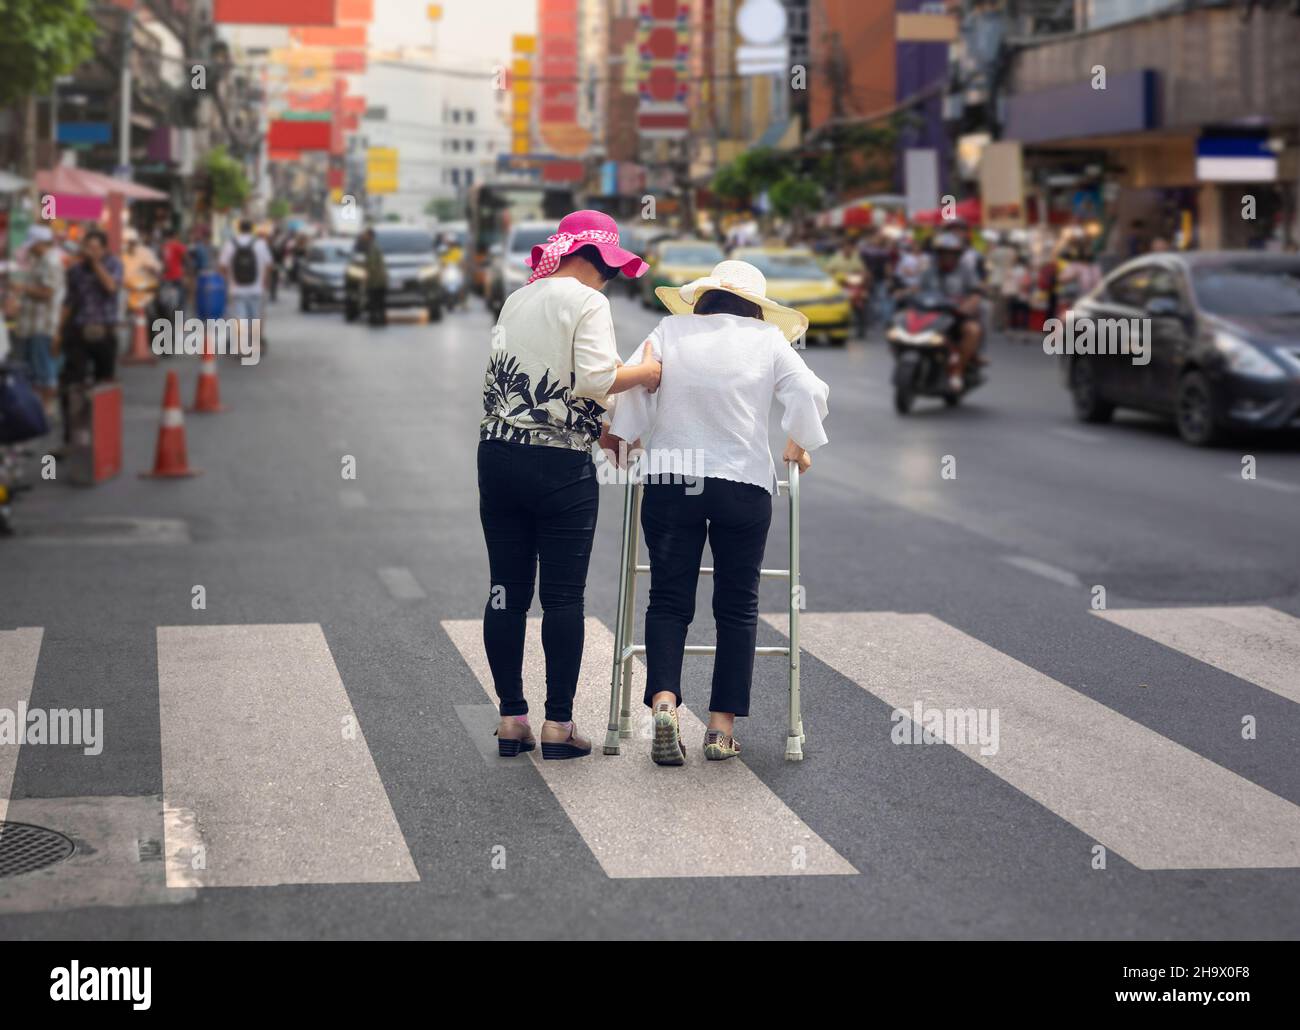 Daughter take care elderly woman crossing the street in Chinatown area Stock Photo